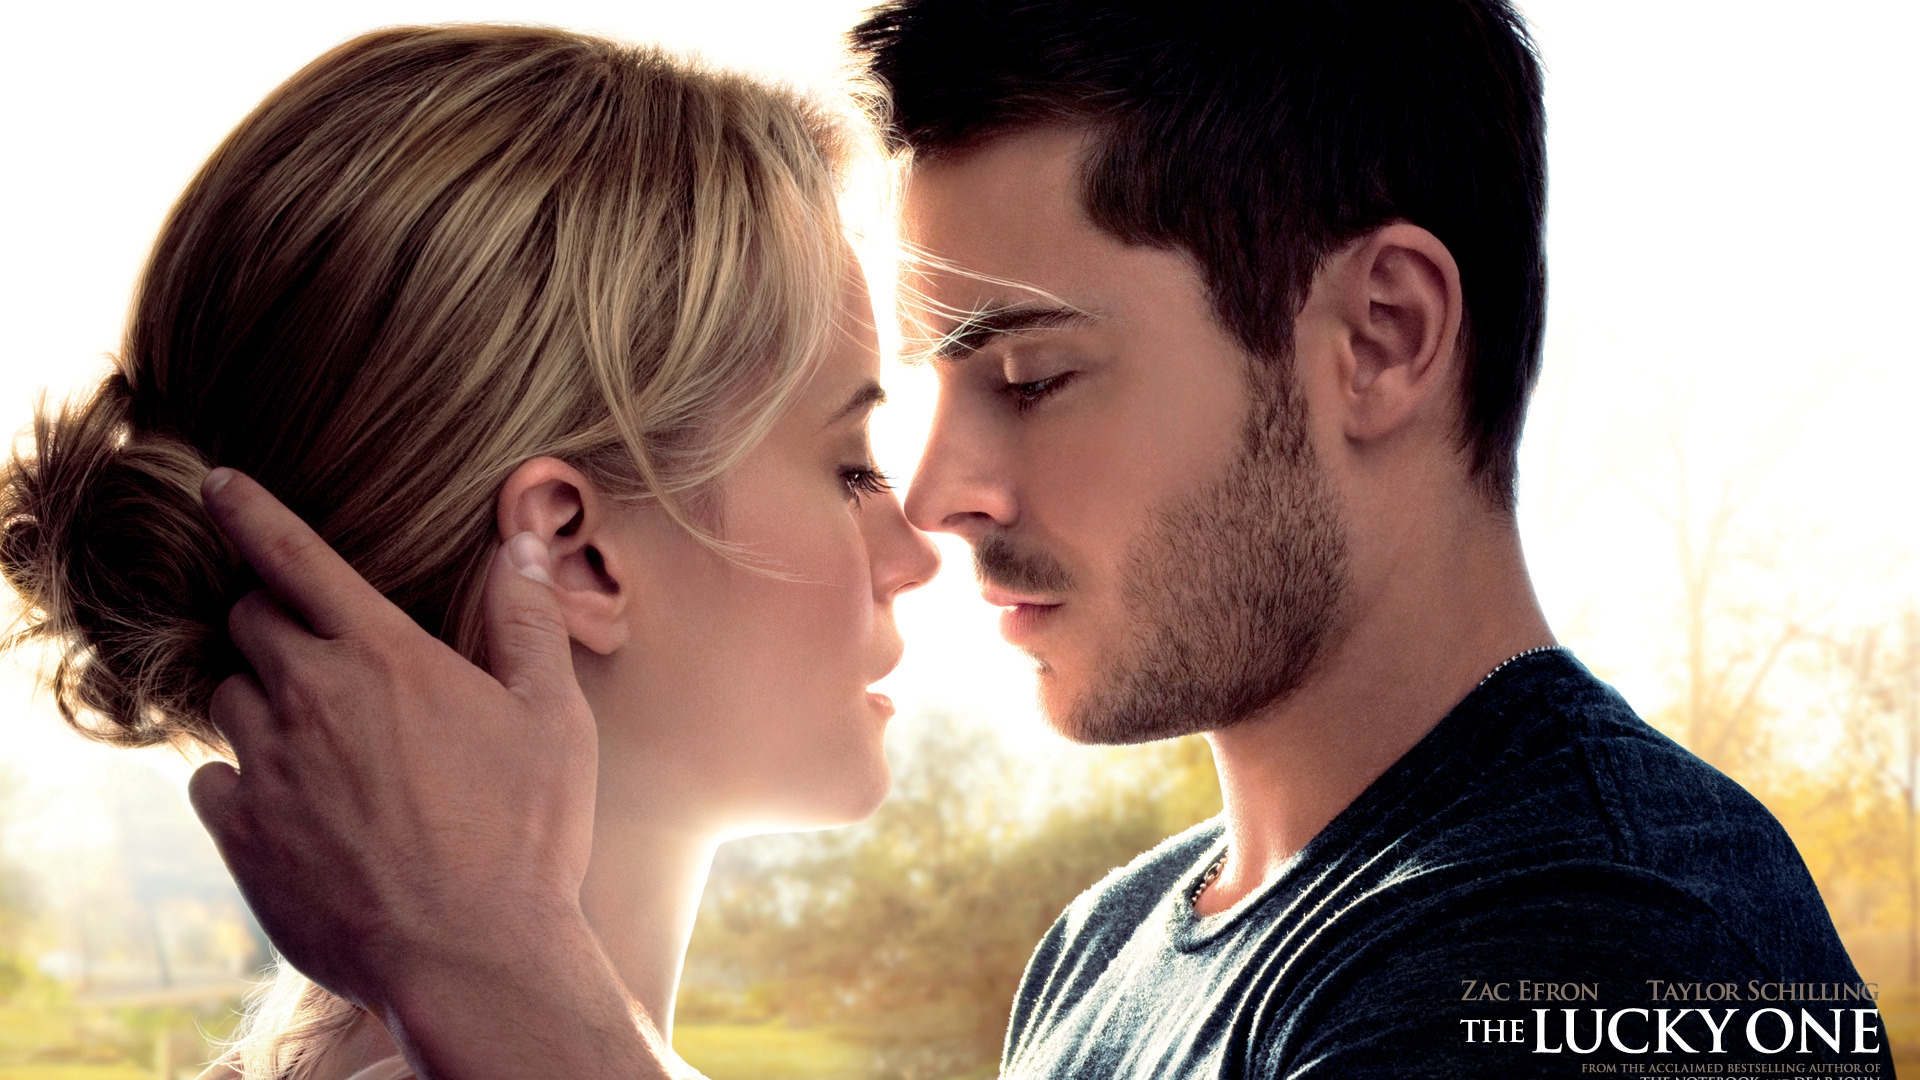 The Lucky One Movie for 1920 x 1080 HDTV 1080p resolution